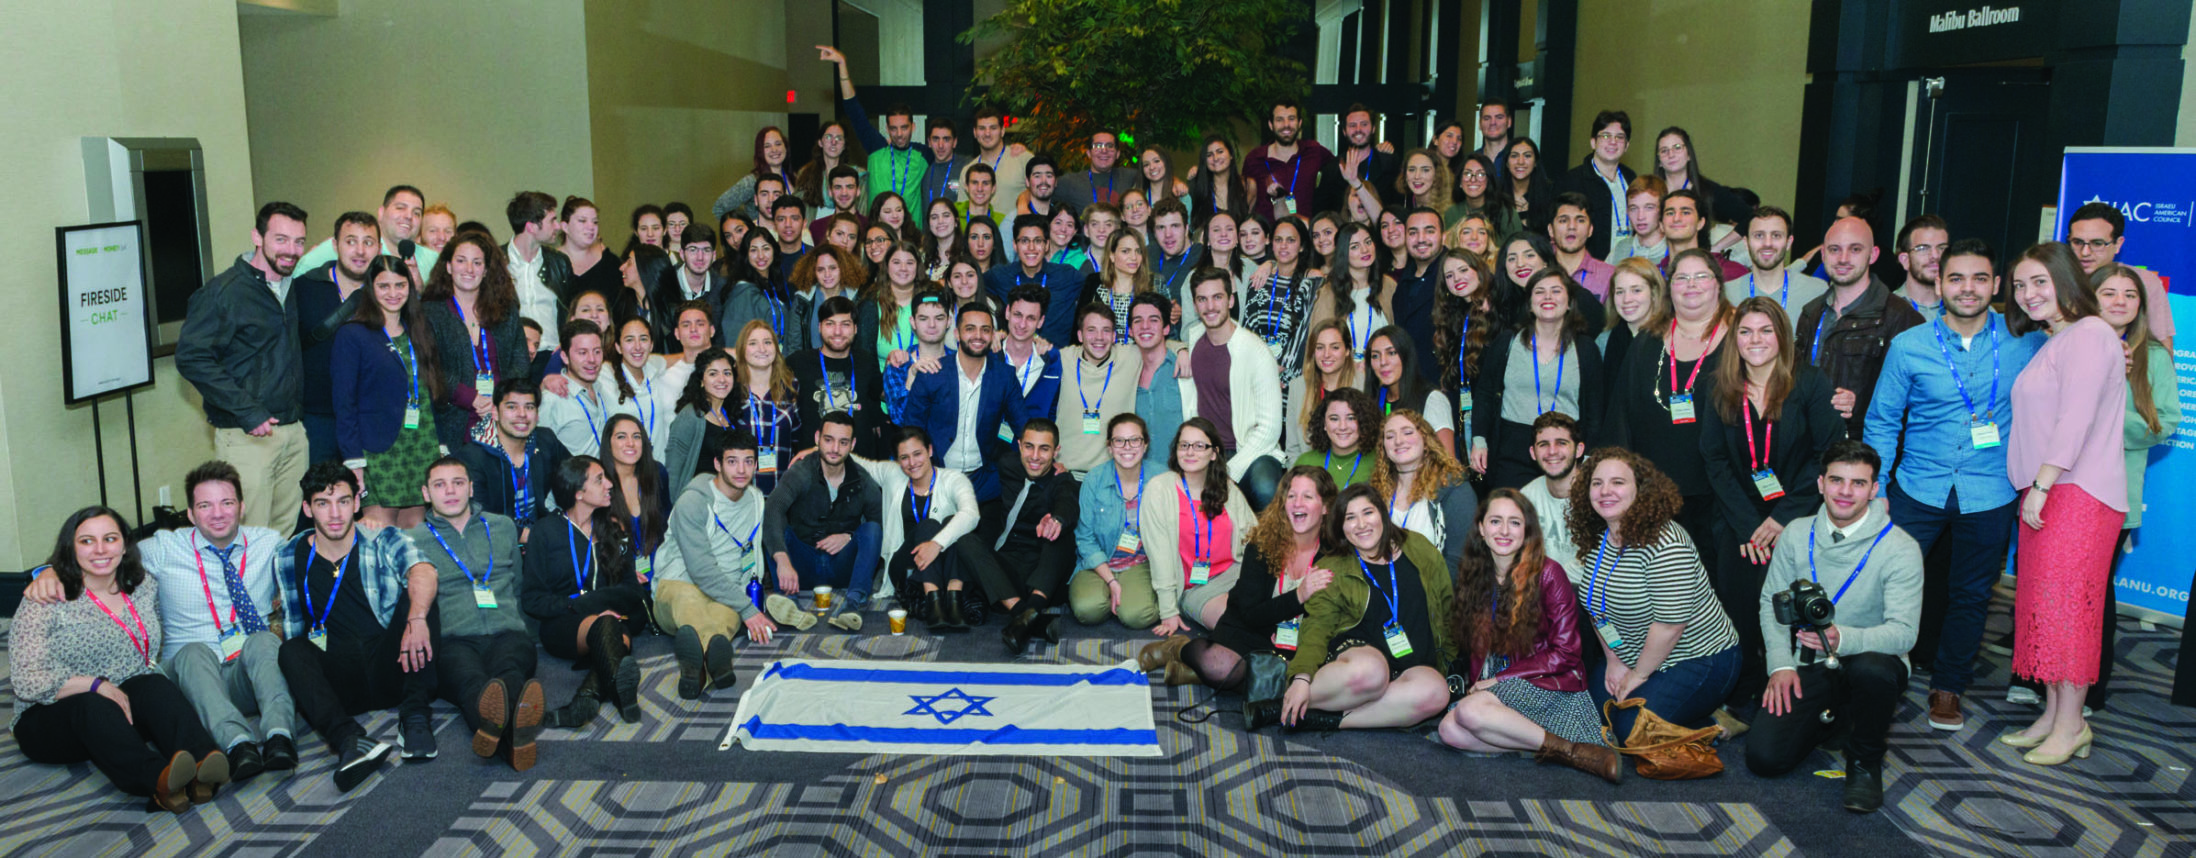 Approximately 400 Israeli-American students from across the country attended the Israeli American Council Mishelanu conference.  Photo courtesy of Israeli American Council.